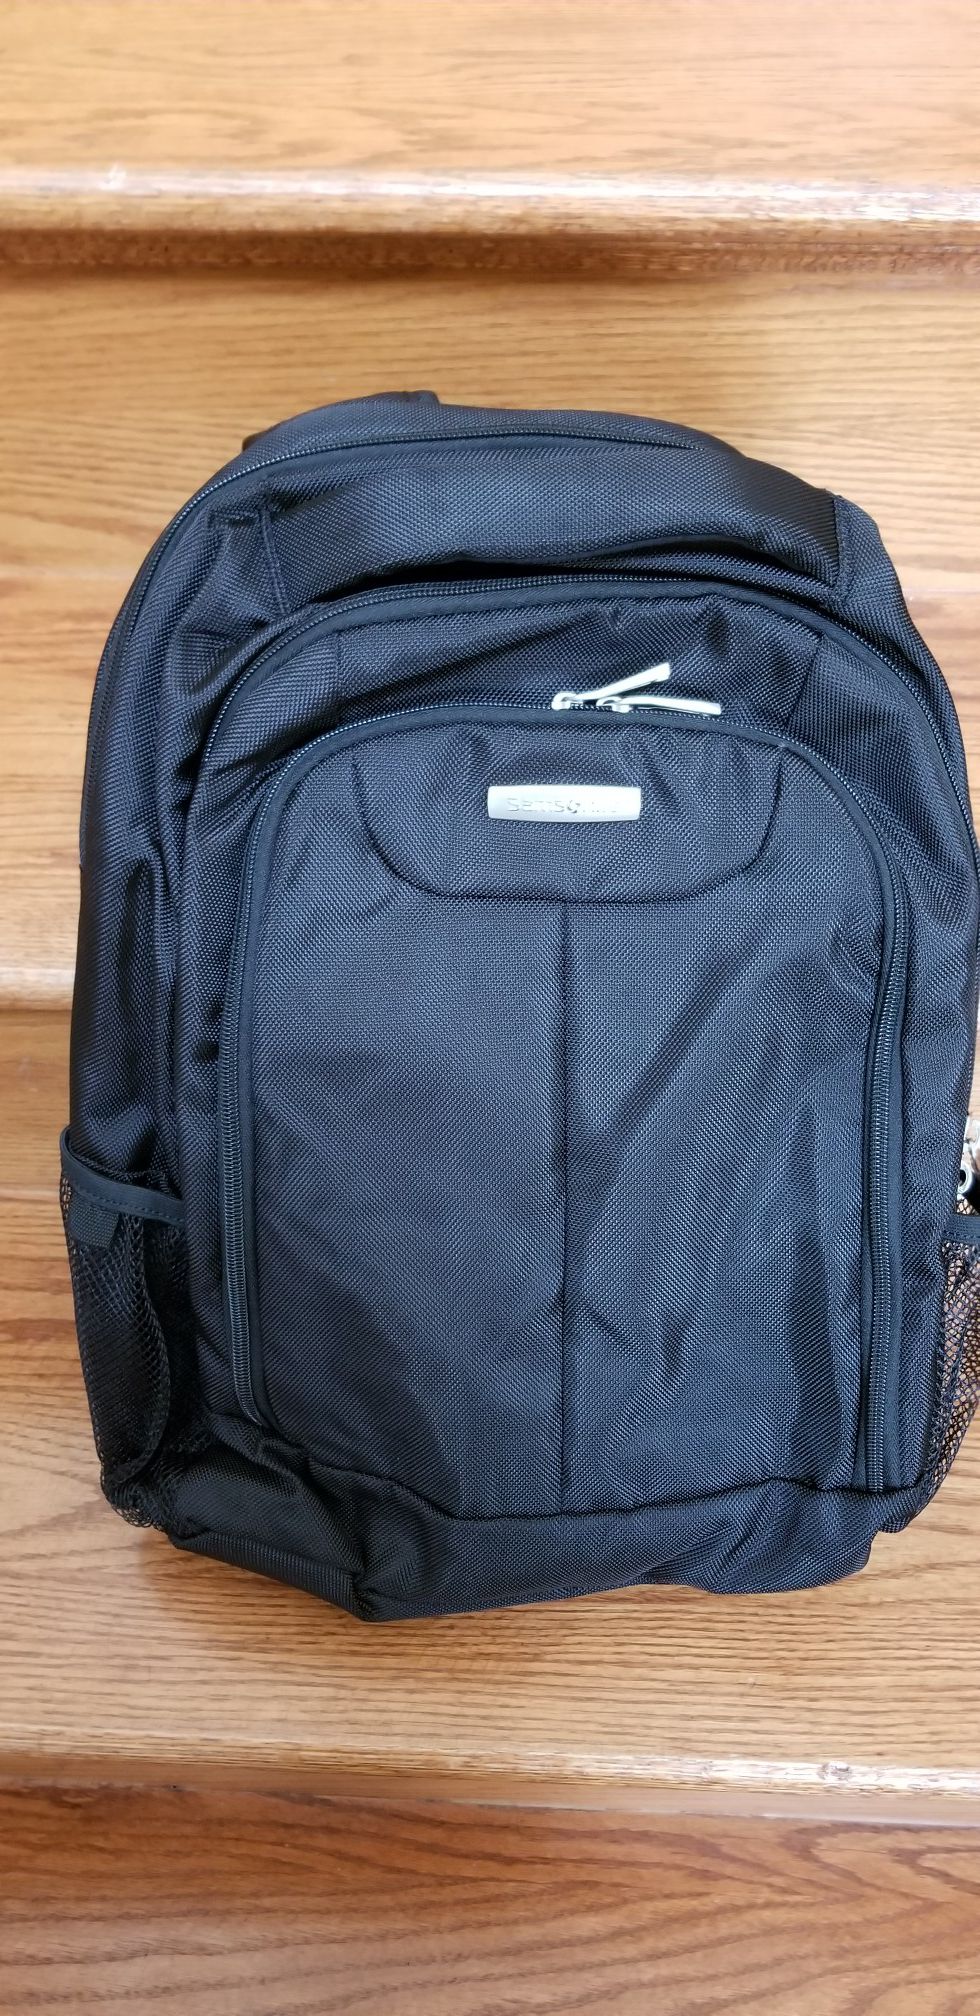 Samsonite Laptop Backpack. Brand New With Tags.